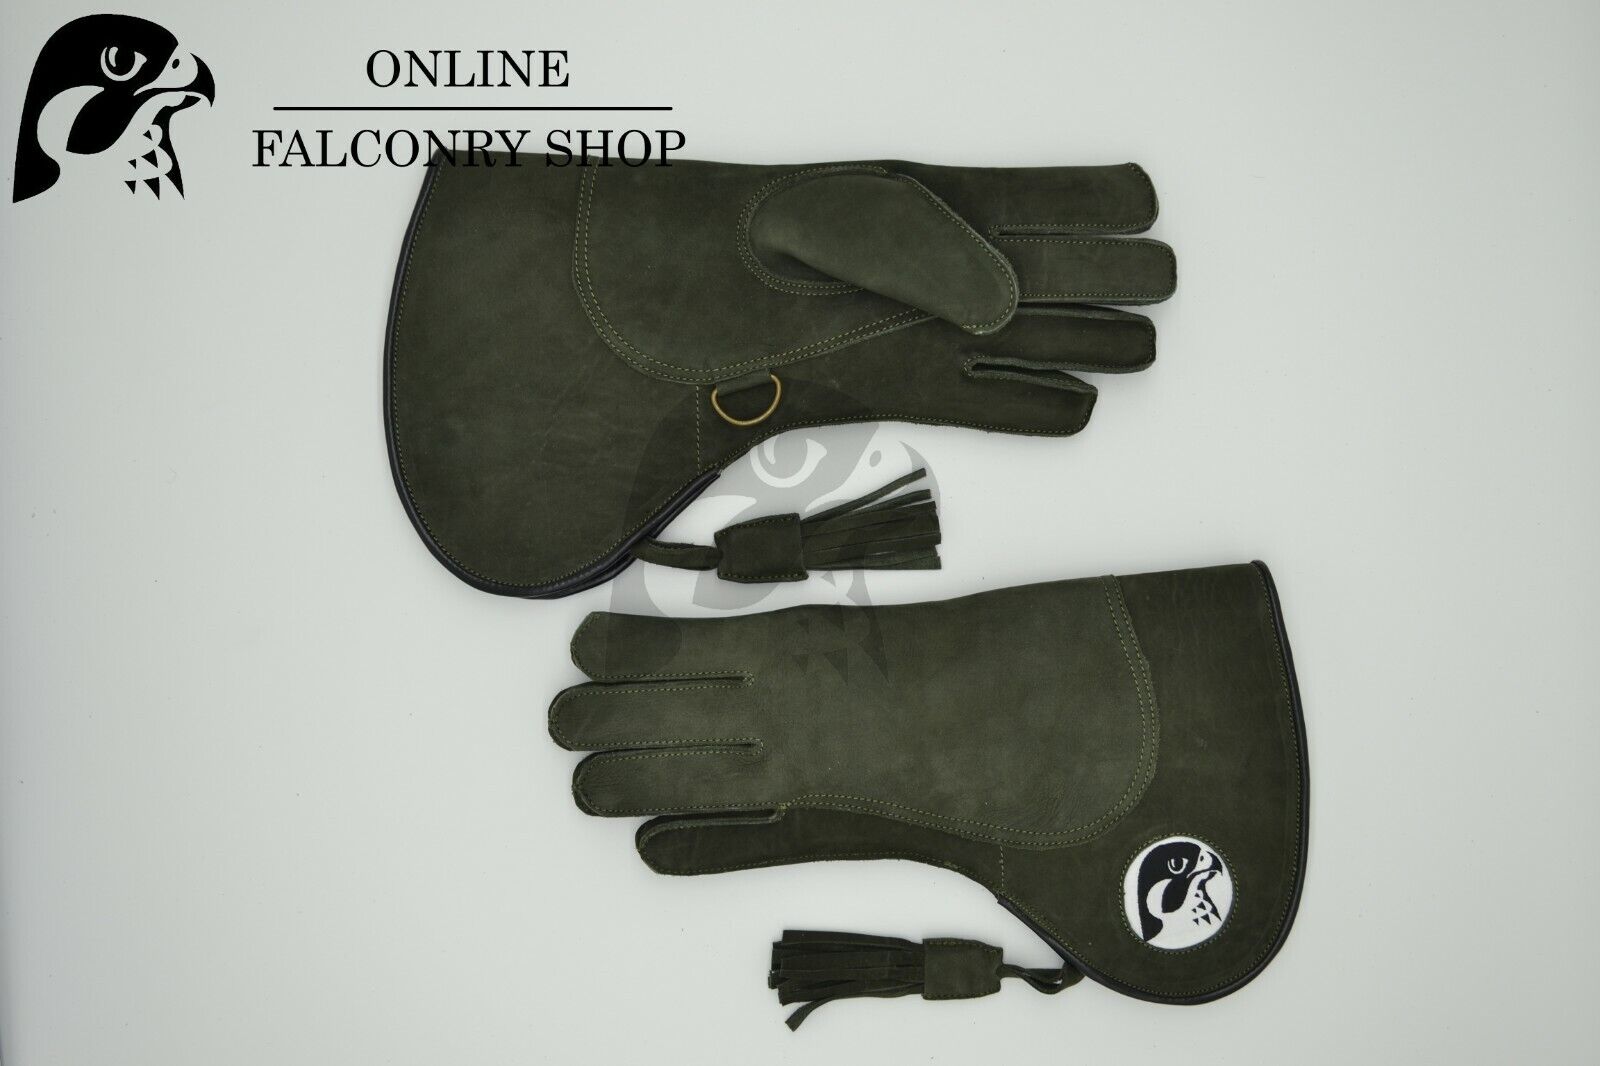 OFS Green Nubuck Double Layer, Fur Lined Glove Size Small